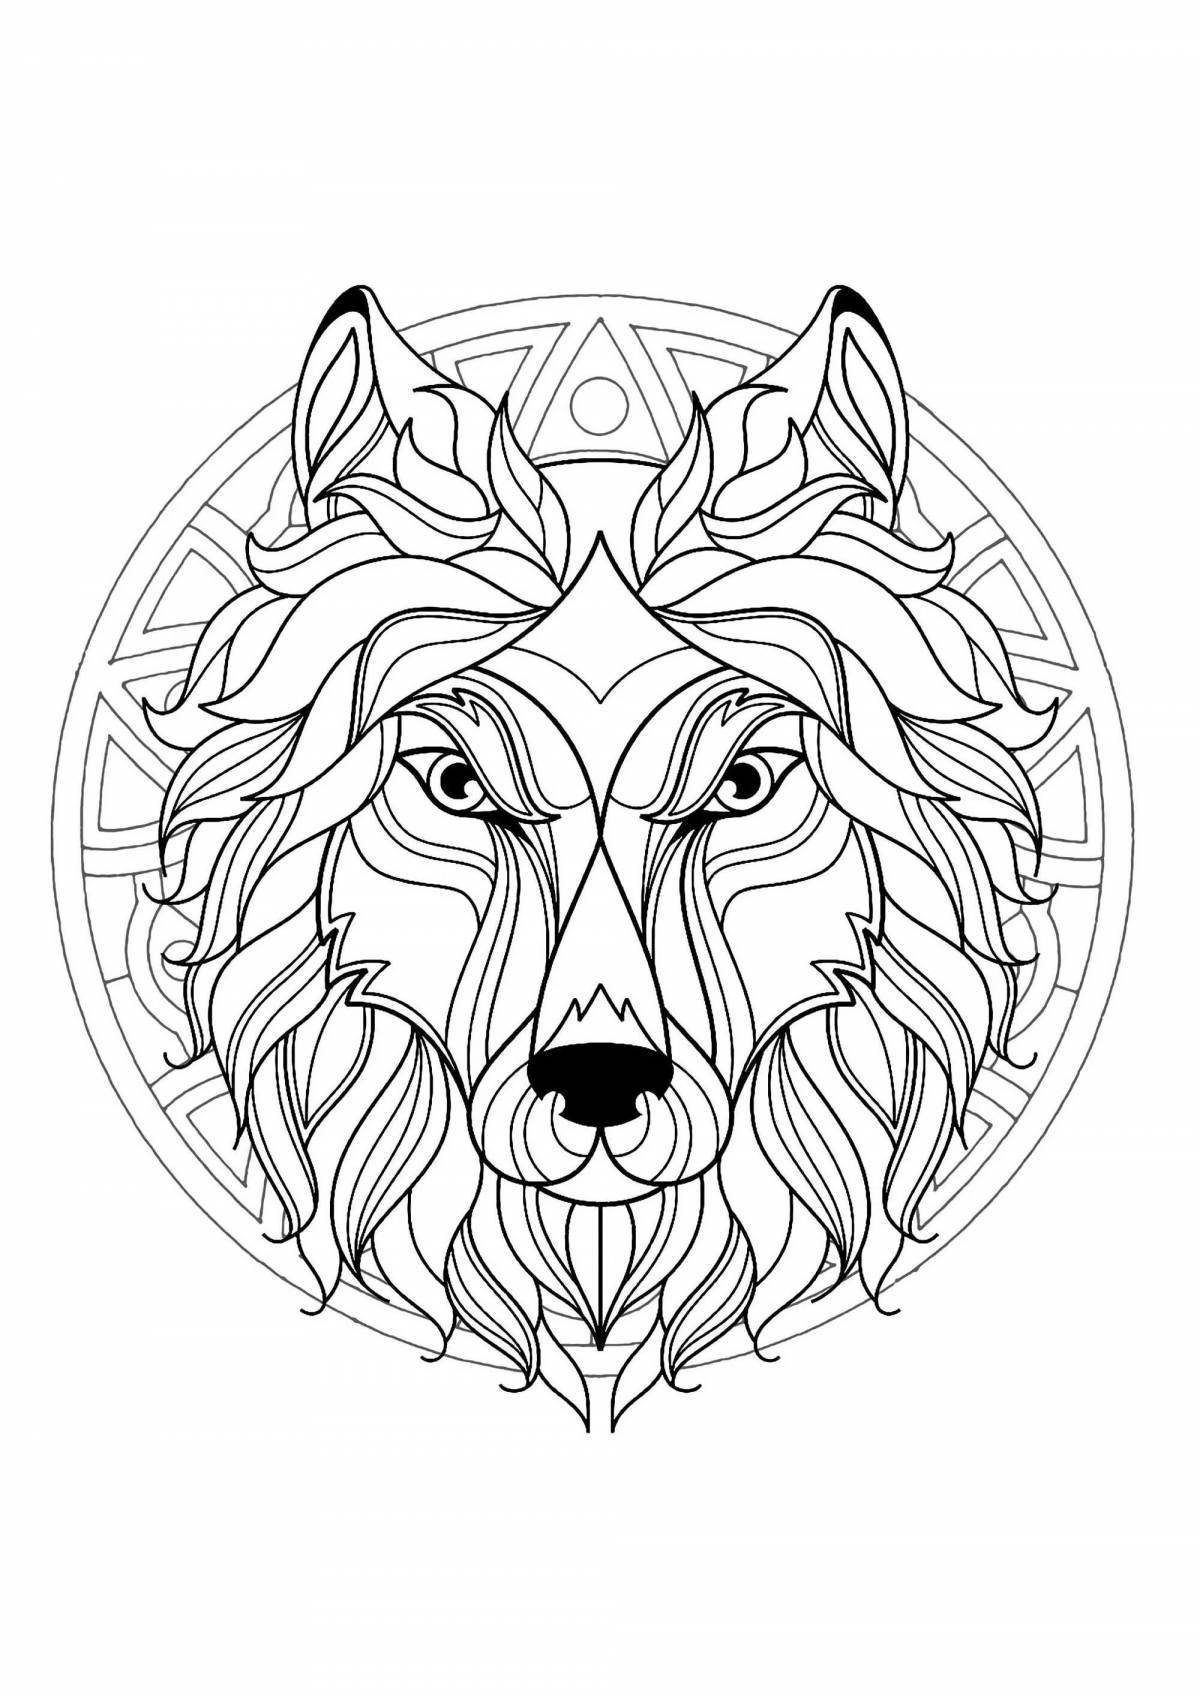 Fairytale wolf head coloring book